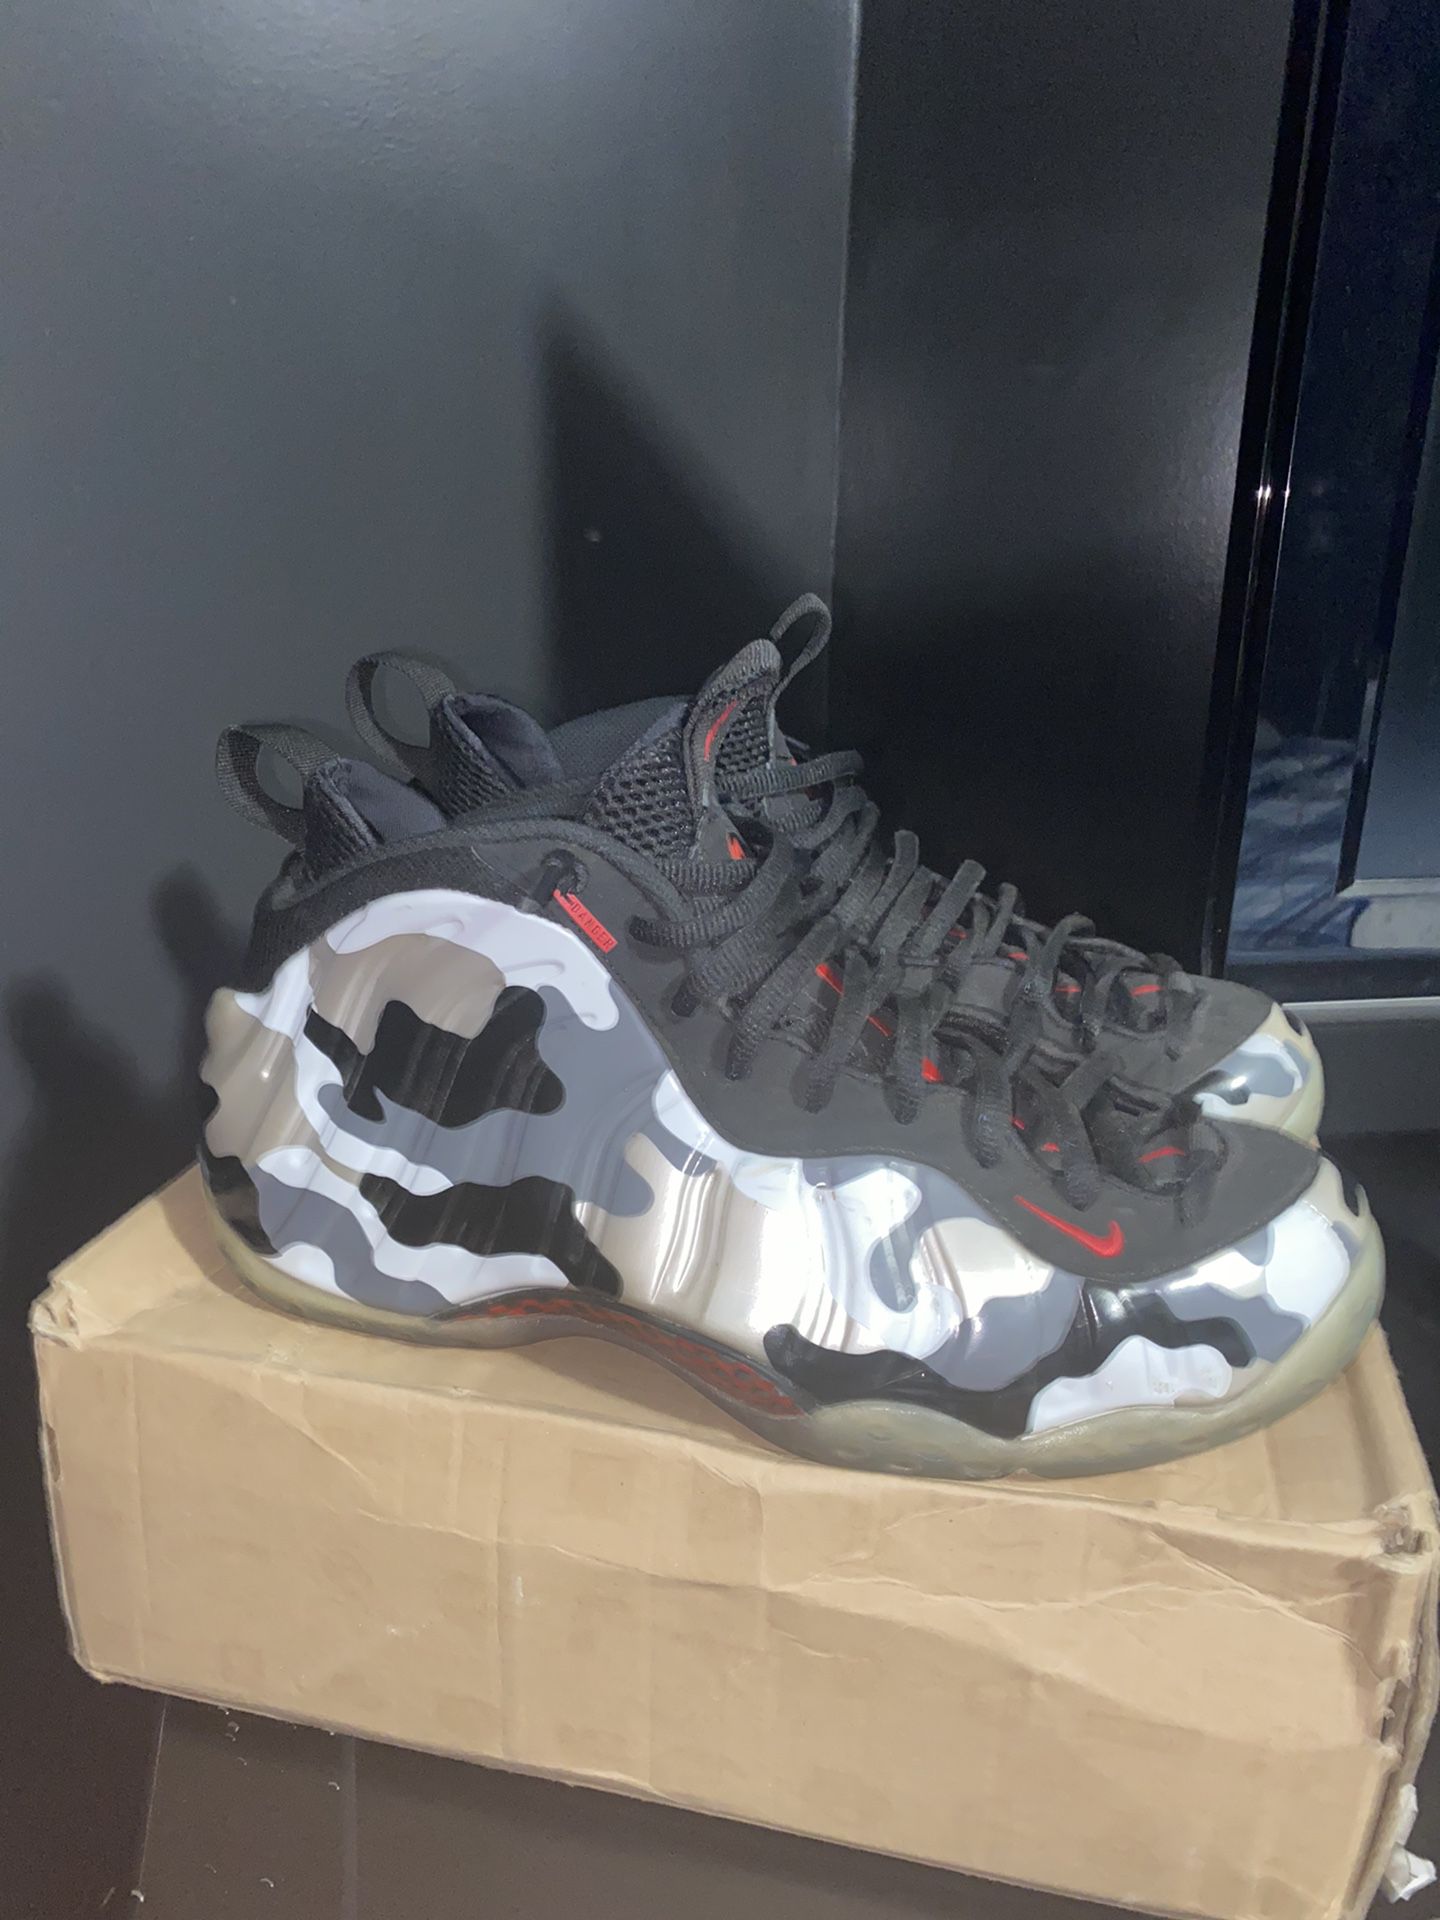 Fighter Jet Foamposites (size 11.5) ✅delivery